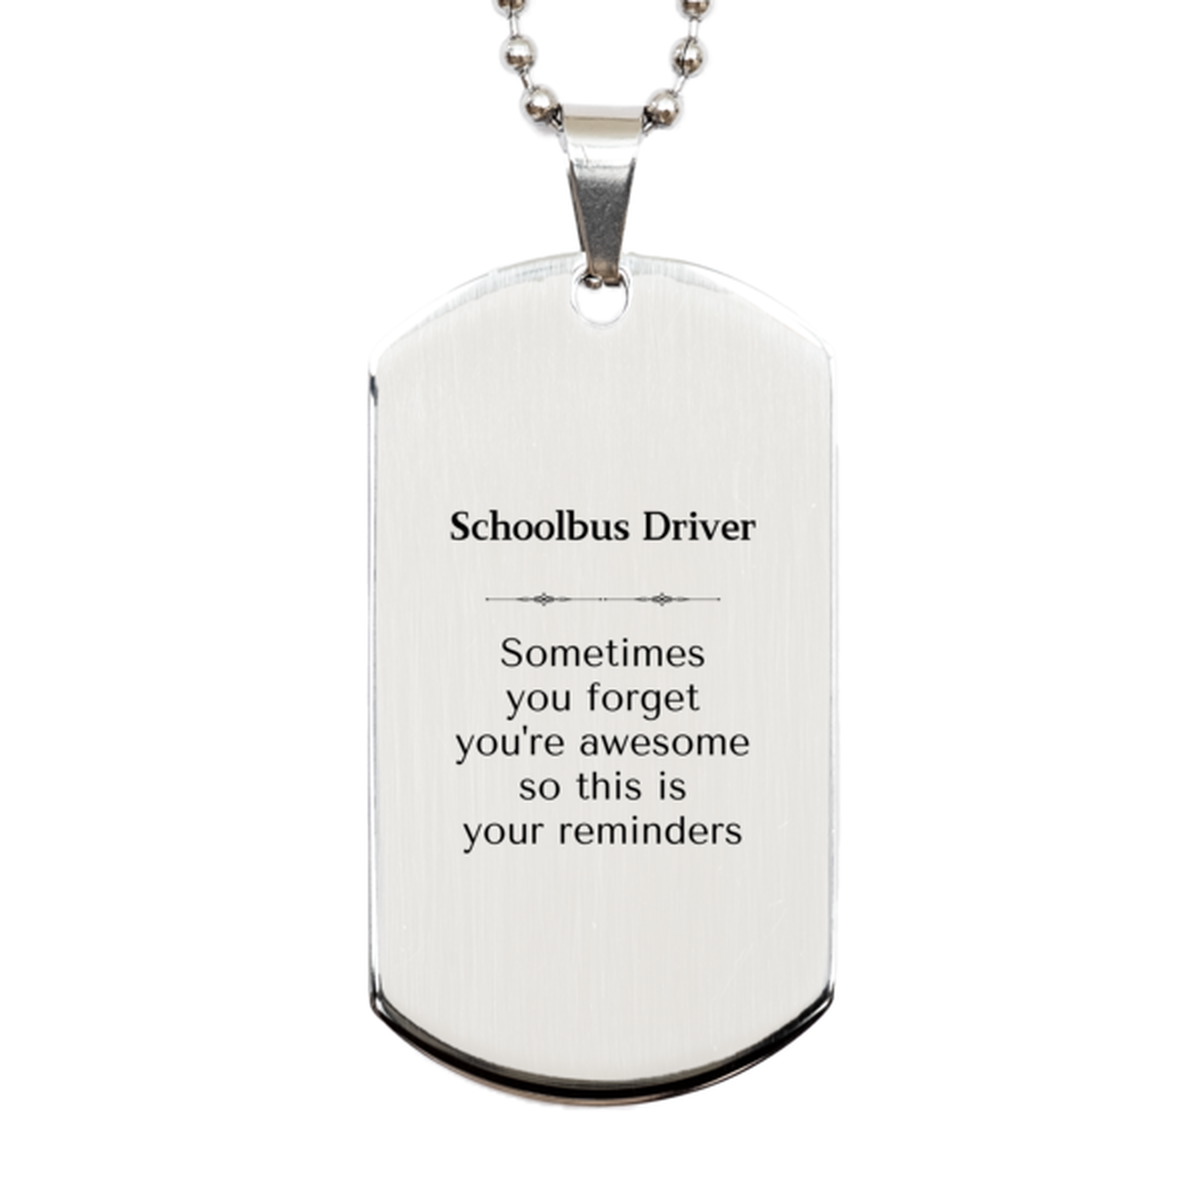 Sentimental Schoolbus Driver Silver Dog Tag, Schoolbus Driver Sometimes you forget you're awesome so this is your reminders, Graduation Christmas Birthday Gifts for Schoolbus Driver, Men, Women, Coworkers